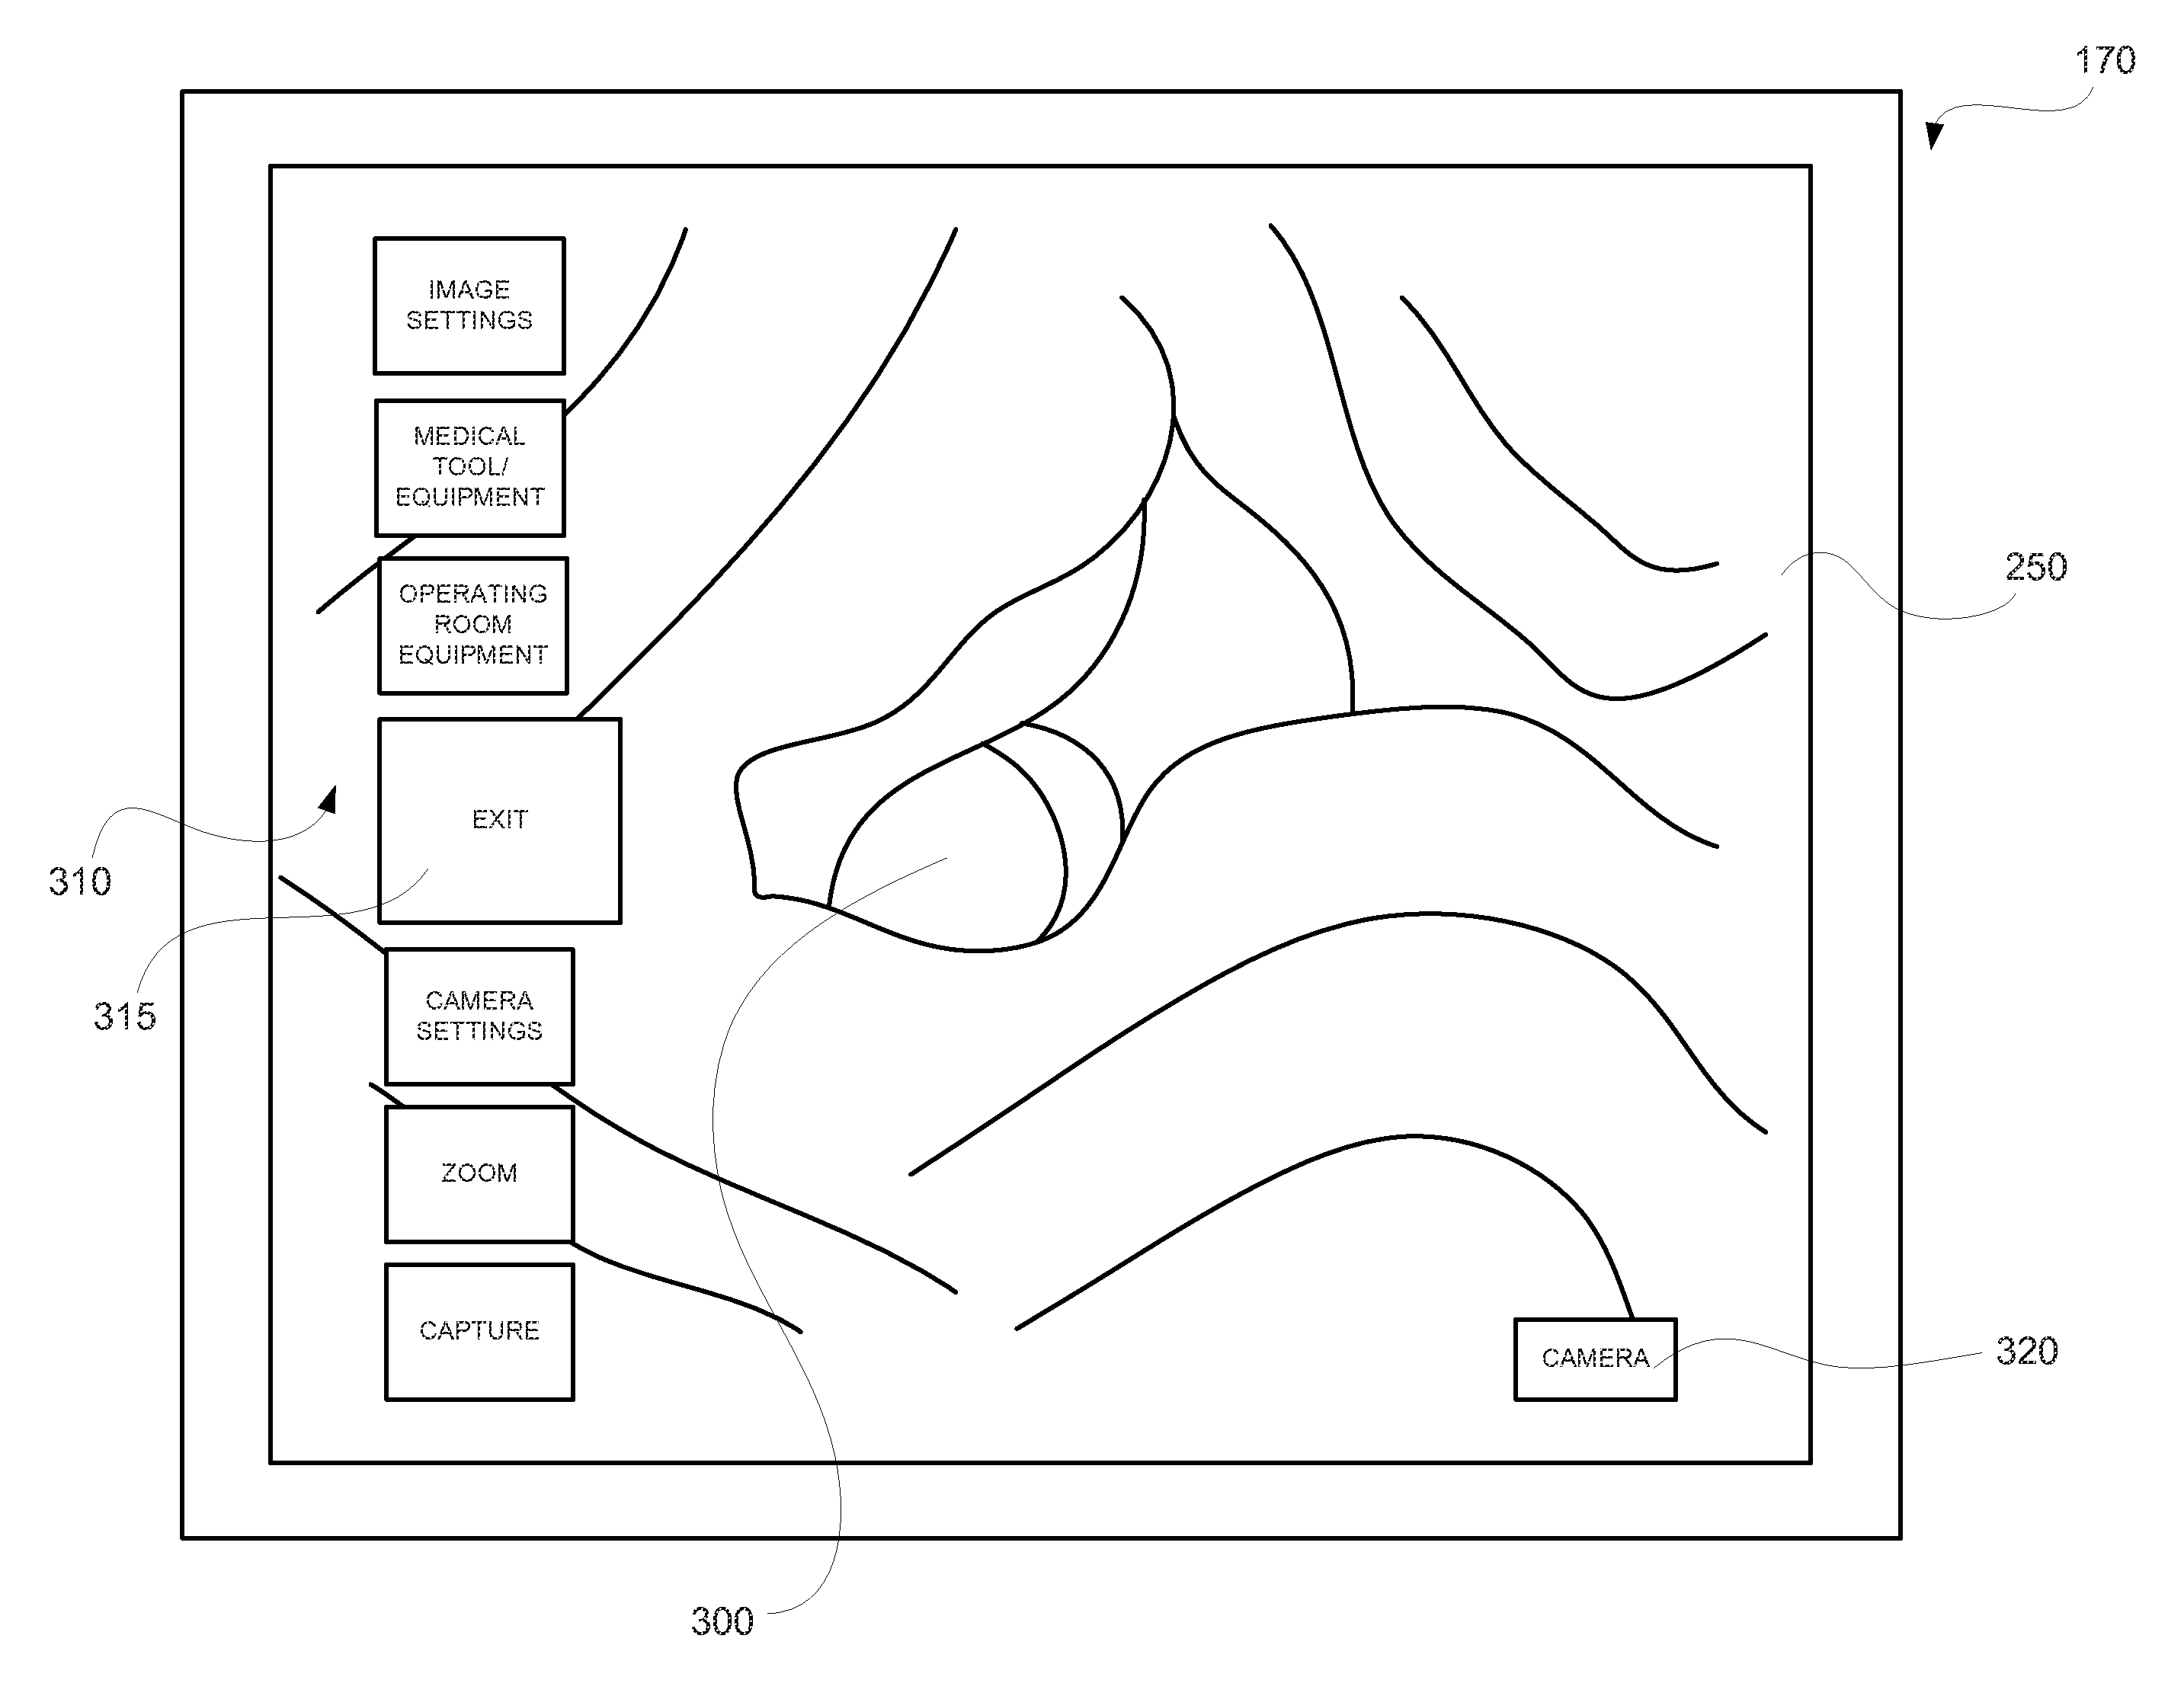 Control System For Modular Imaging Device